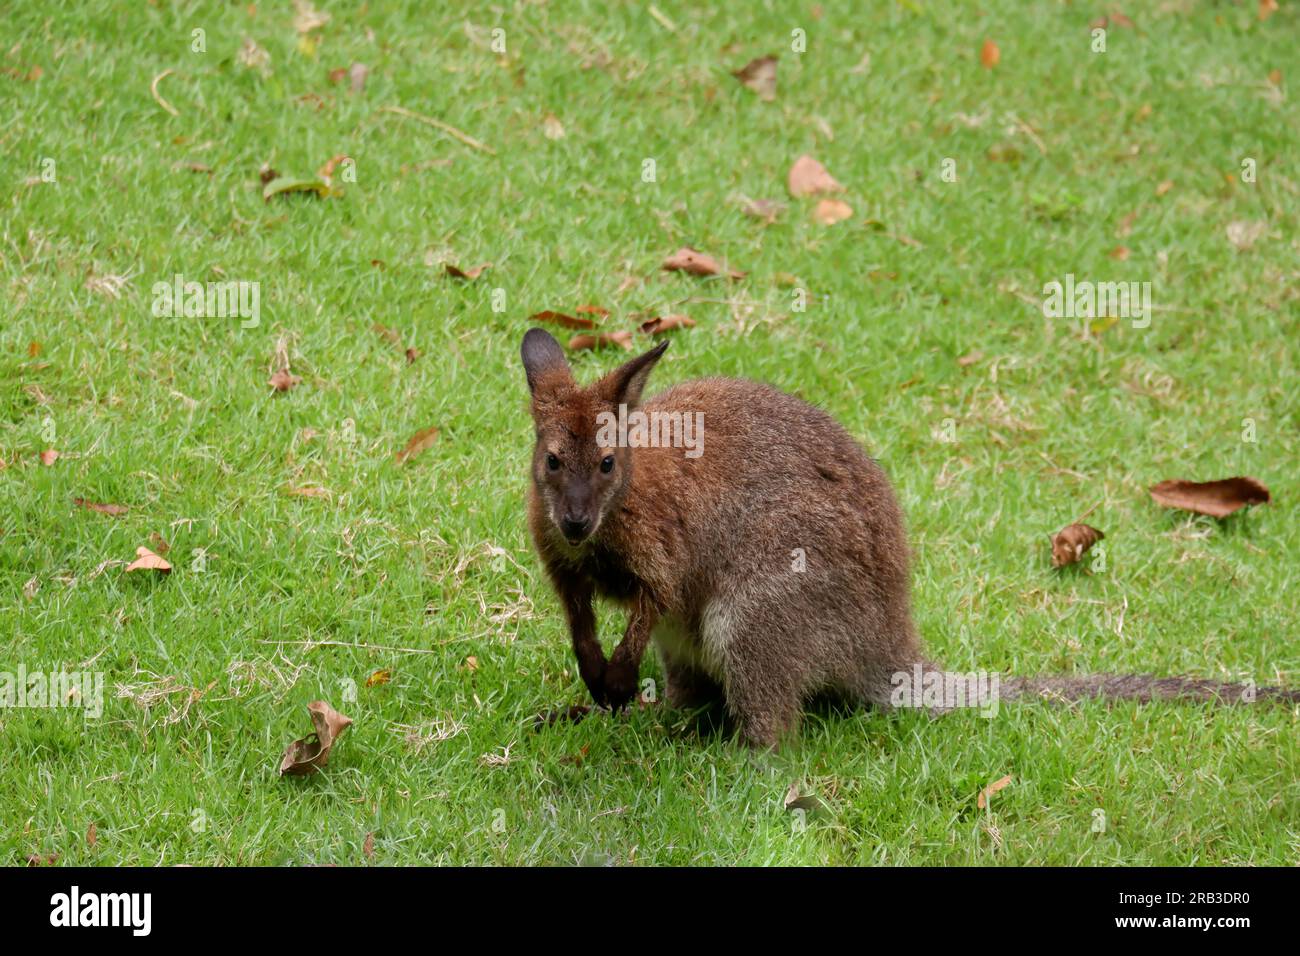 Picture of a kangaroo from the zoo Stock Photo